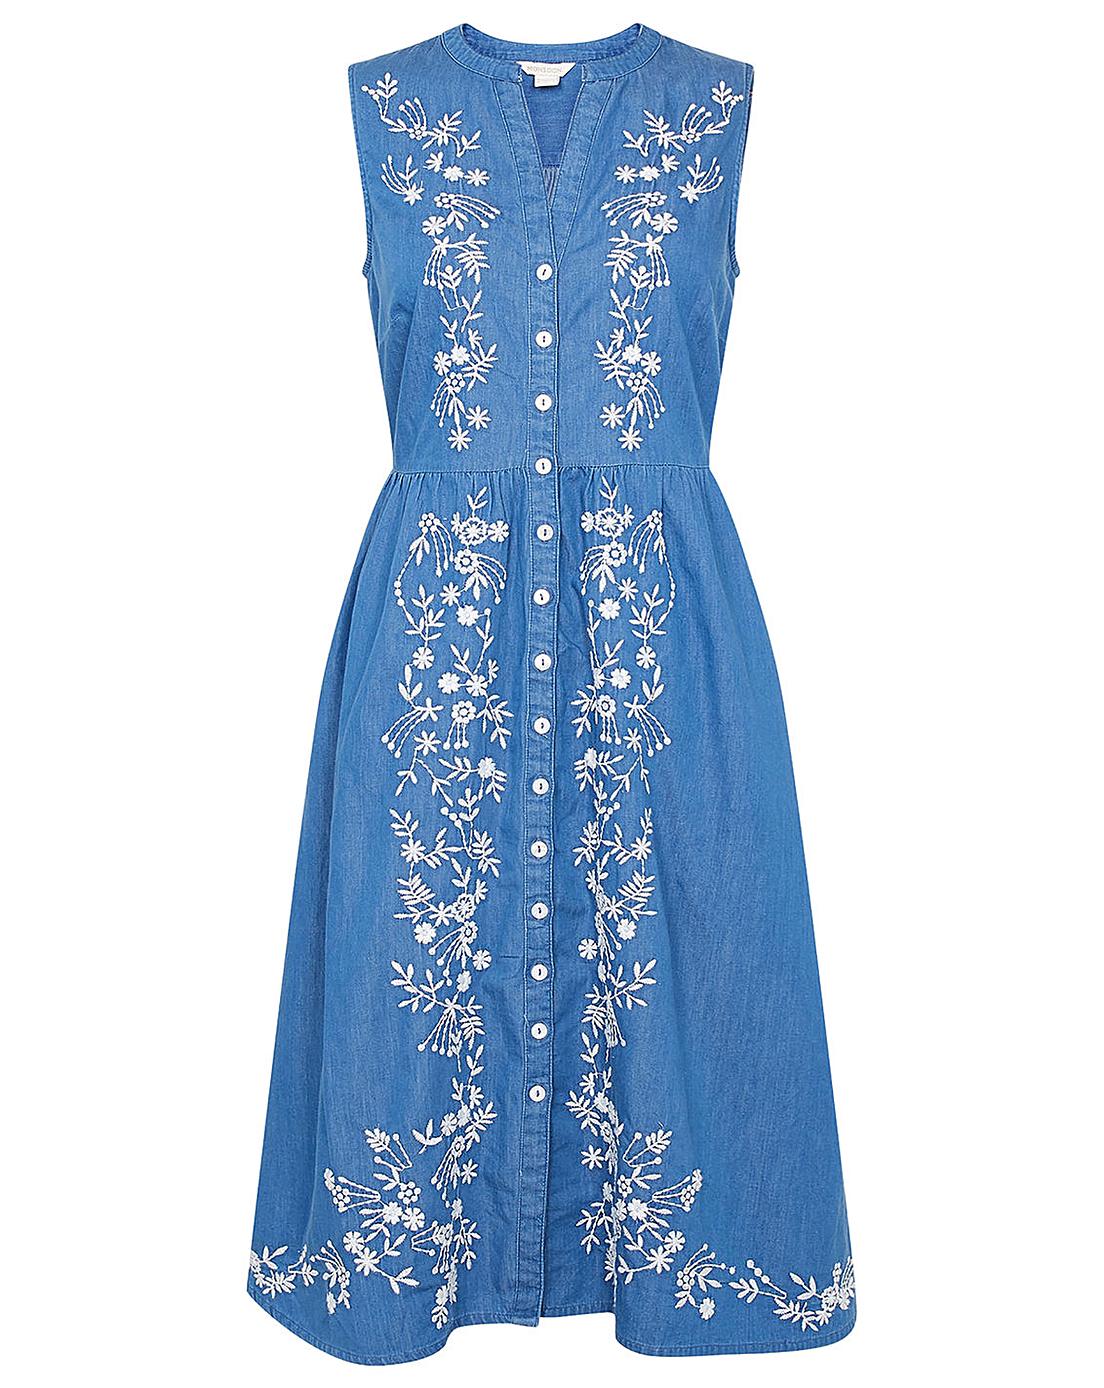 Monsoon EMBROIDERED DENIM DRESS | Simply Be